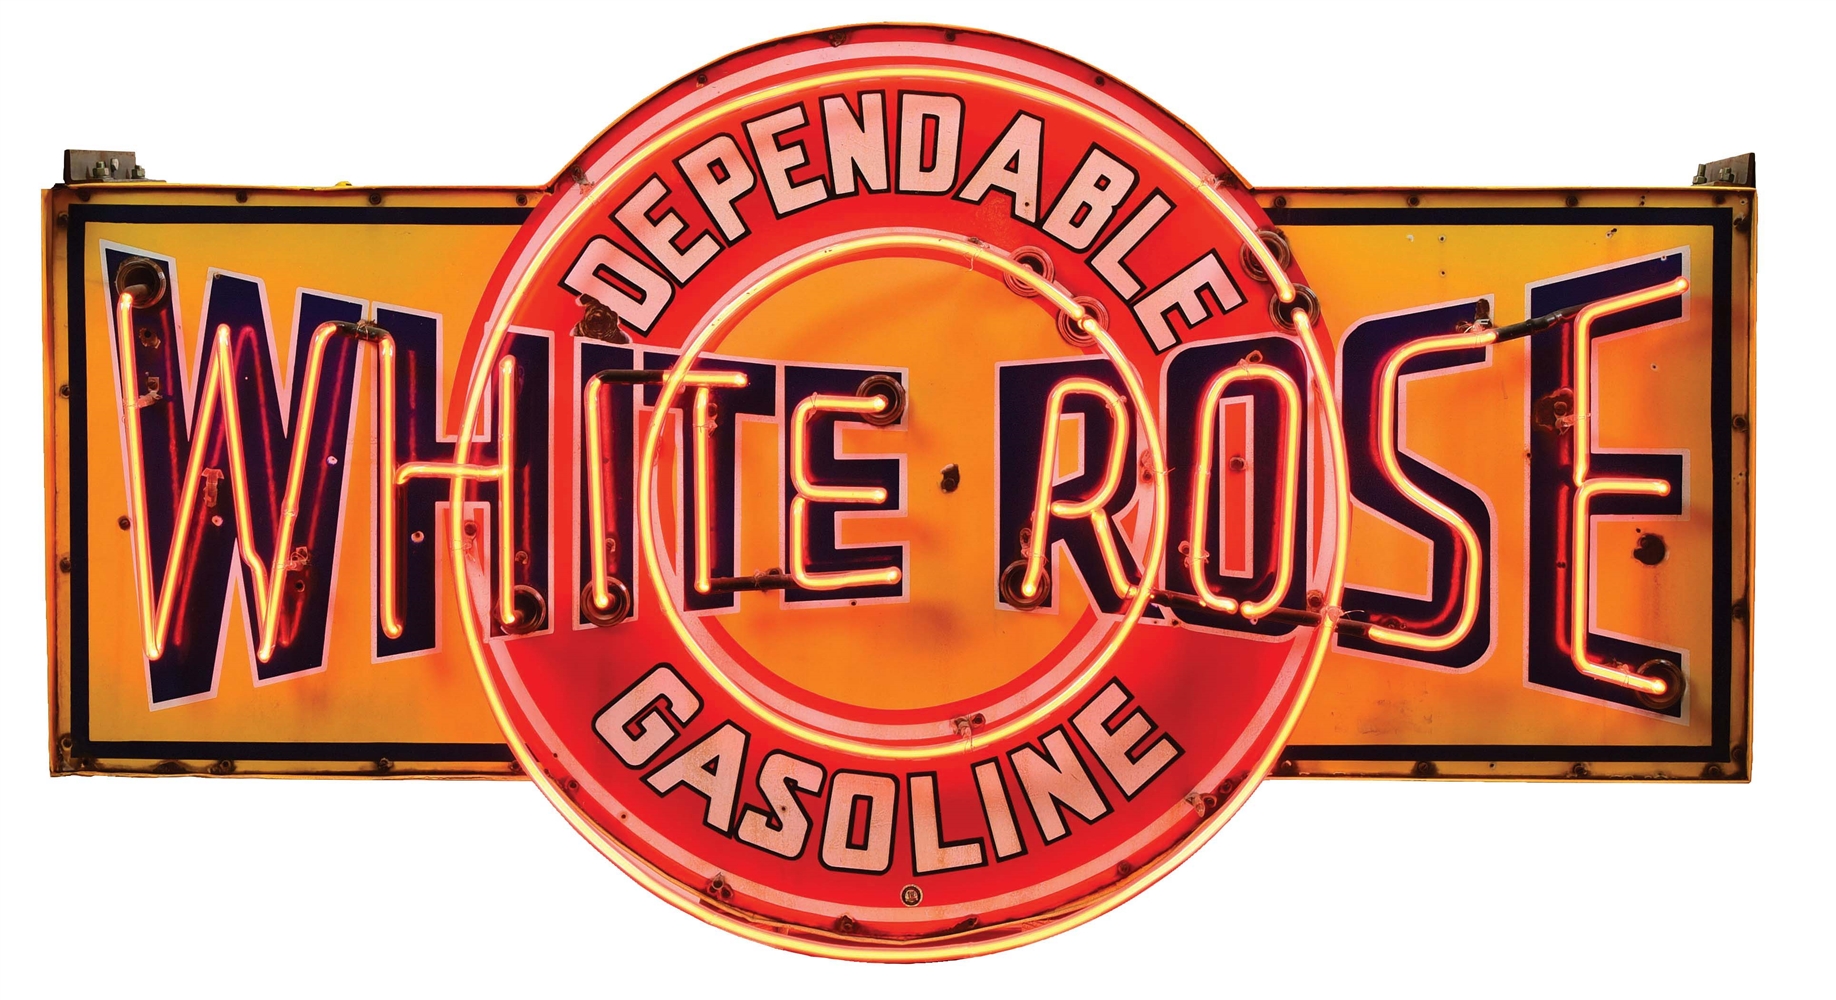 RARE WHITE ROSE DEPENDABLE GASOLINE COMPLETE PORCELAIN NEON SIGN ON ORIGINAL CAN. 